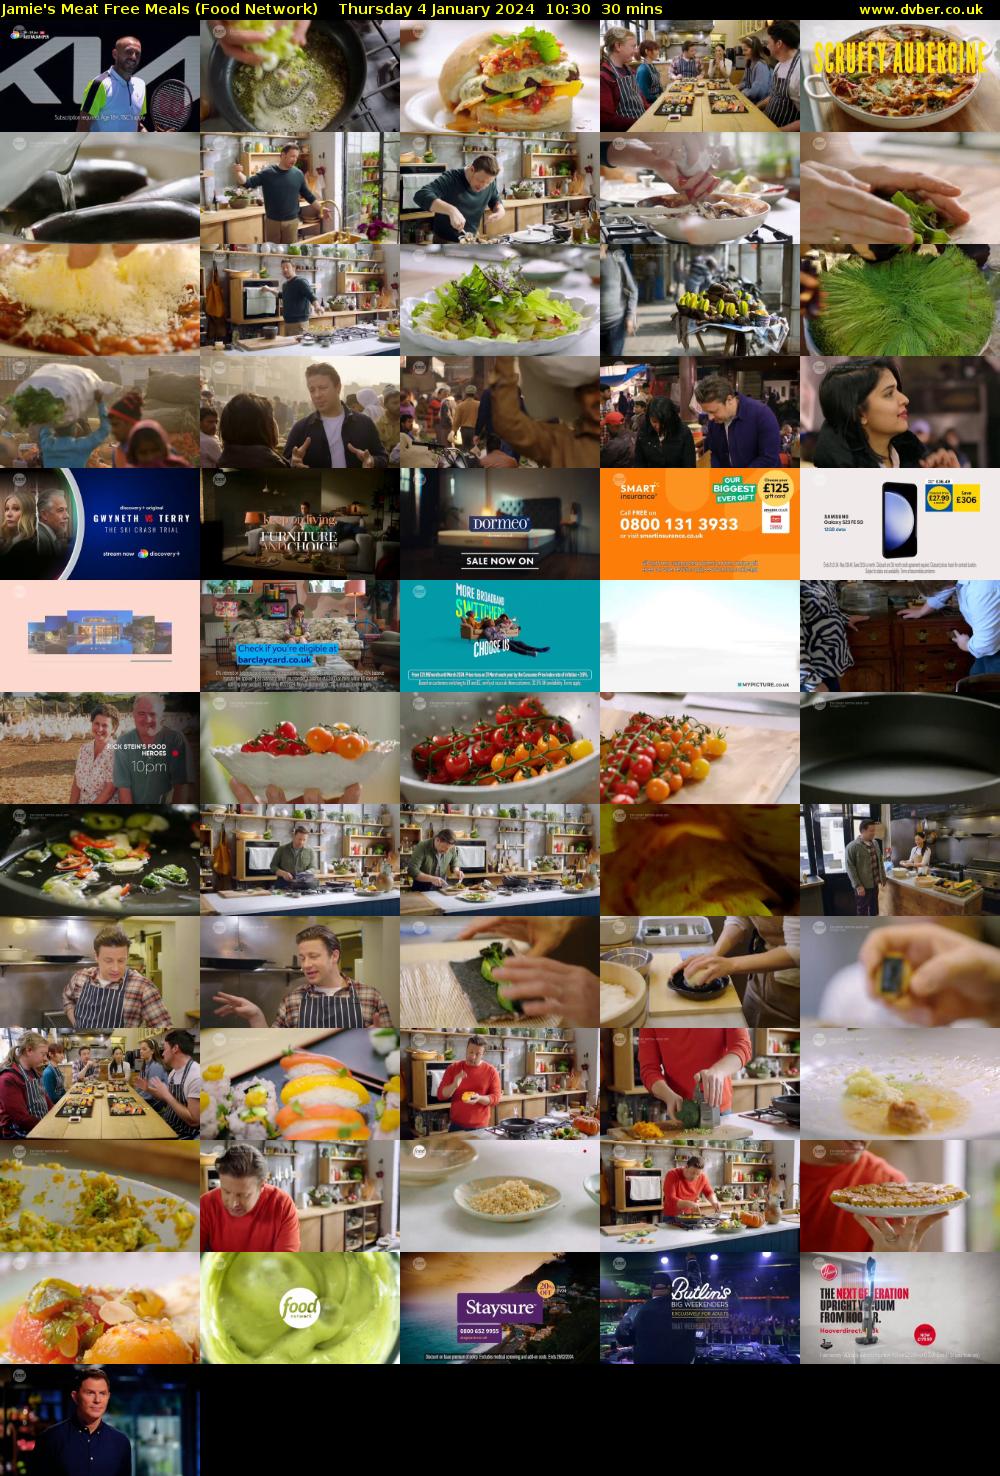 Jamie's Meat Free Meals (Food Network) Thursday 4 January 2024 10:30 - 11:00